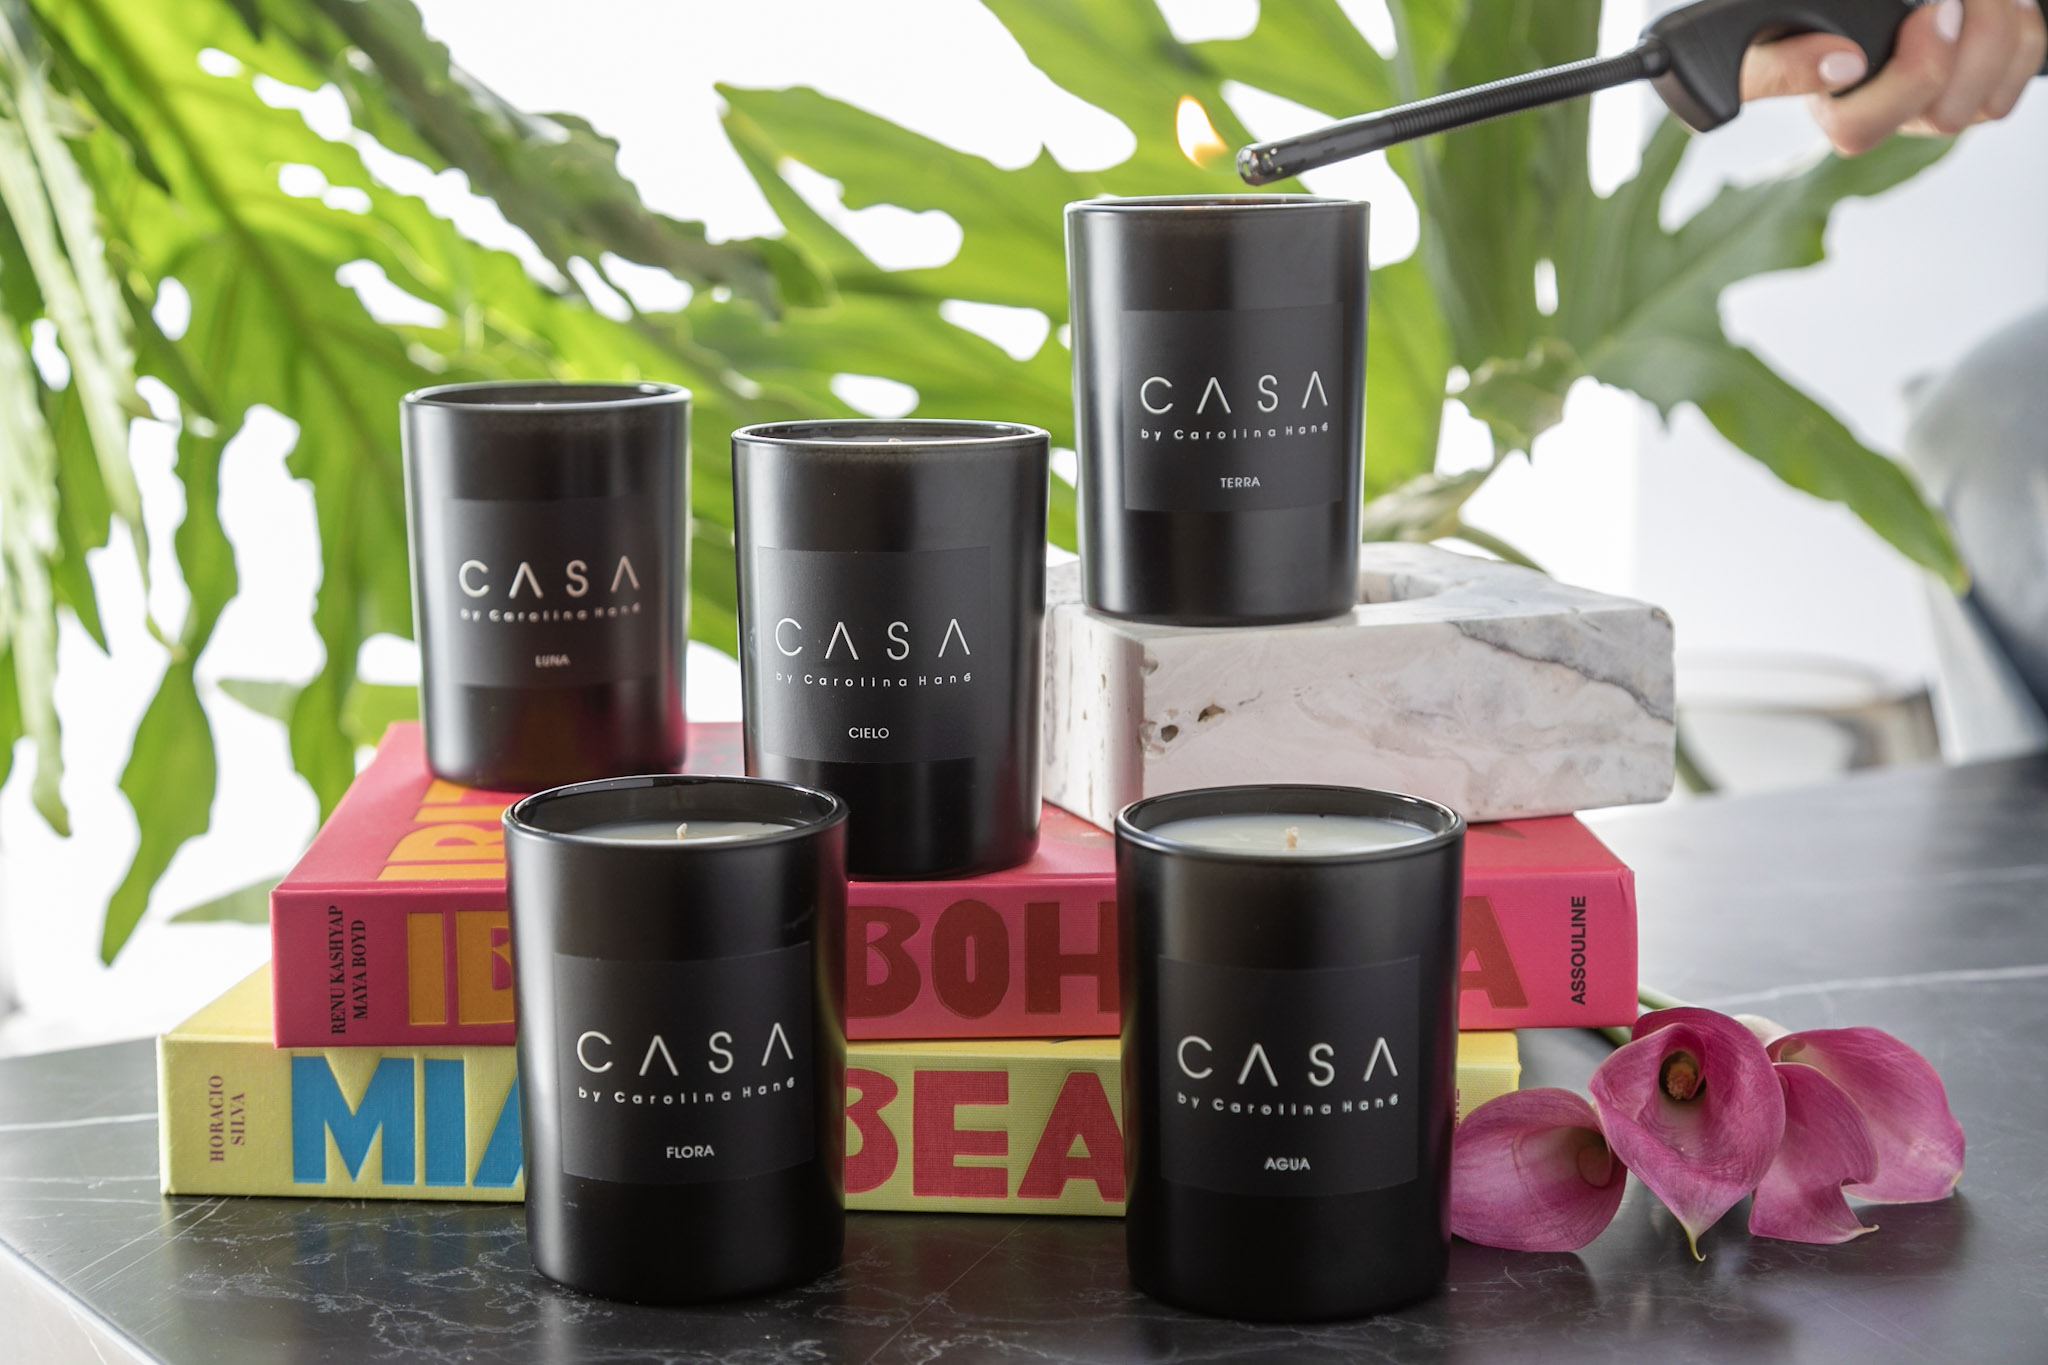 CASA scents help Trio expand its offerings 